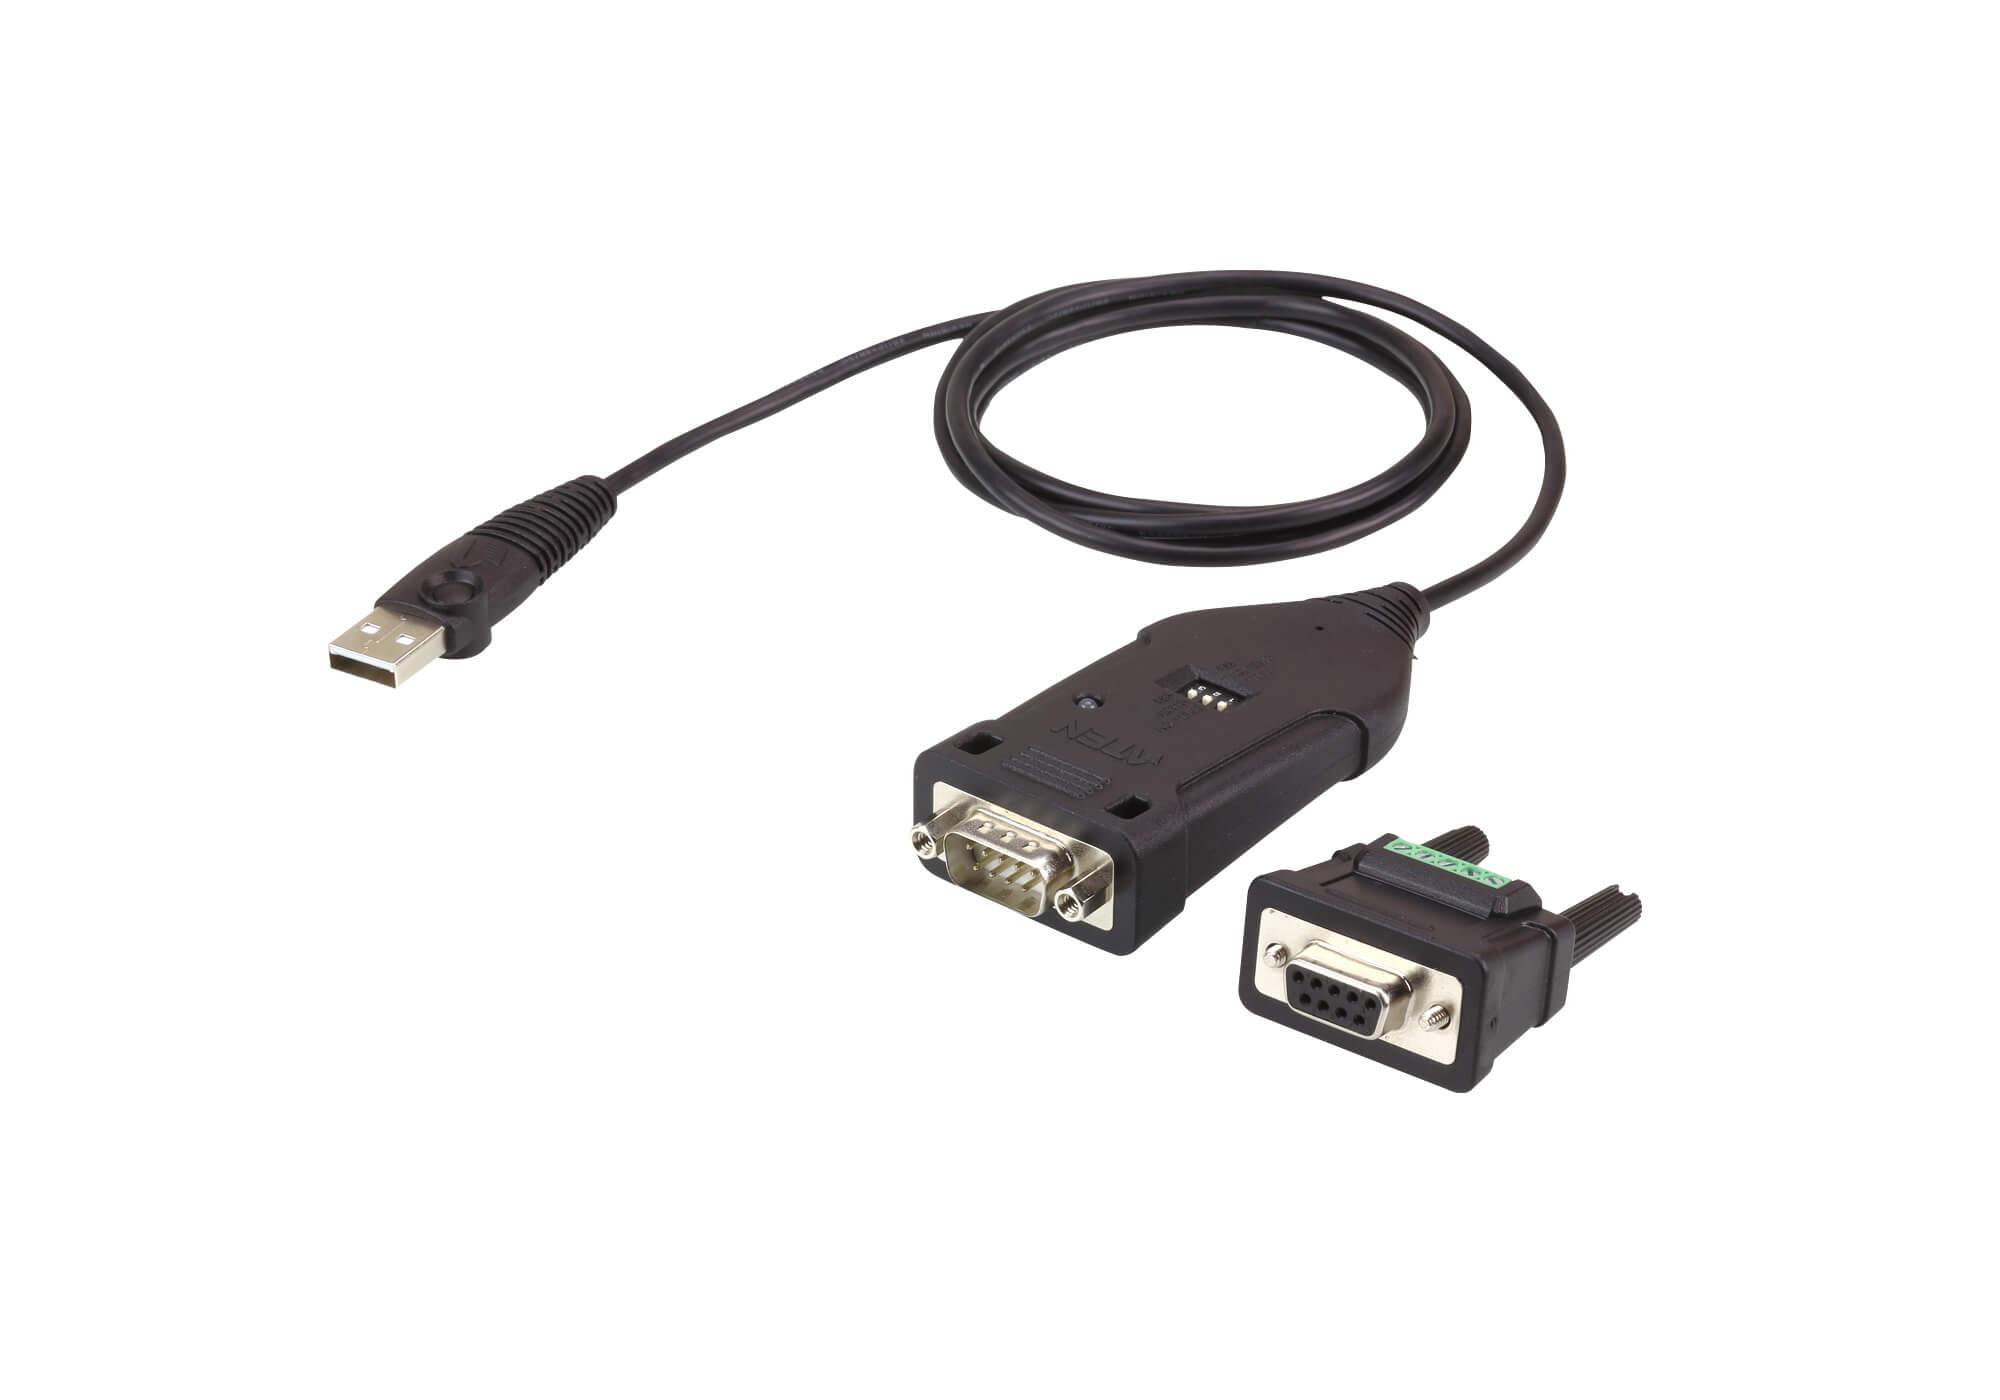 Aten UC485 USB to RS422/485 Adapter